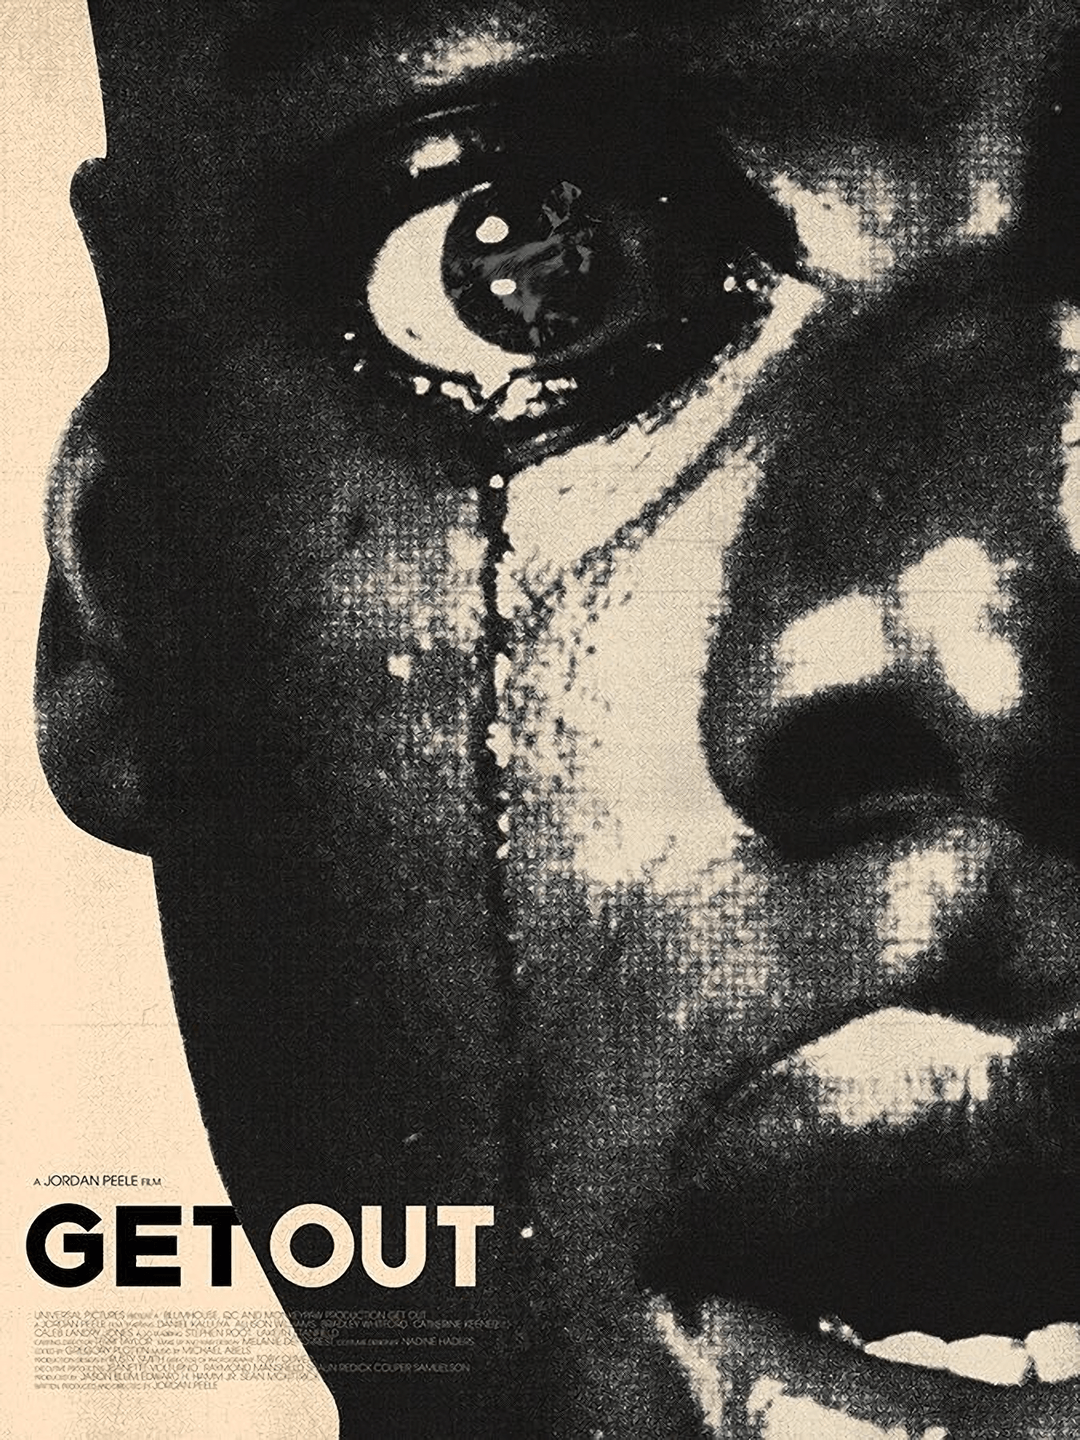 Get Out (2017) HD Wallpaper From Gallsource.com. Thriller & Horror